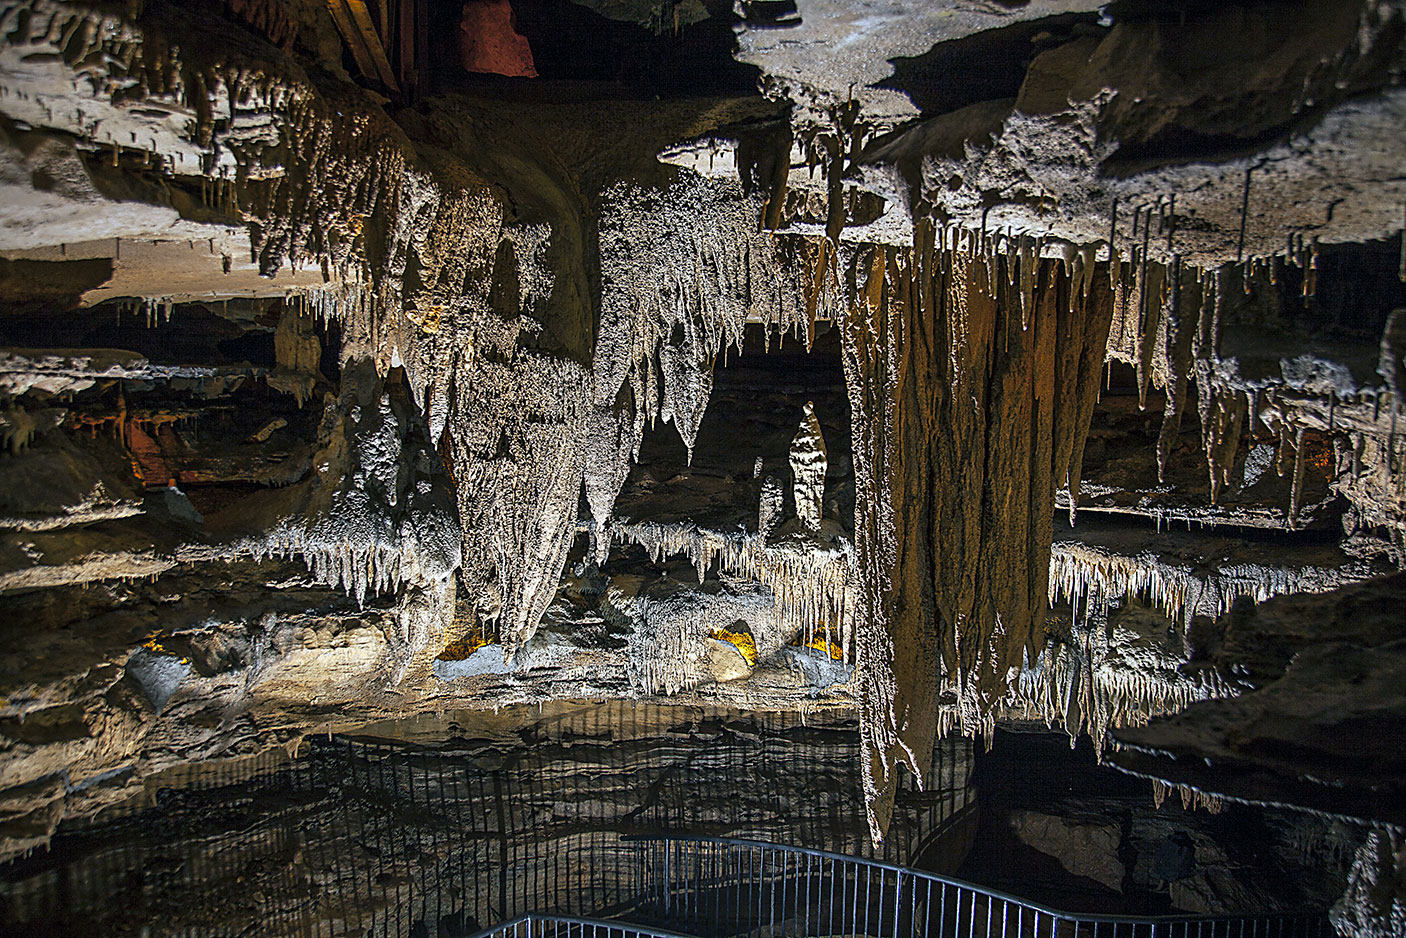 Squire Boone Caverns formations